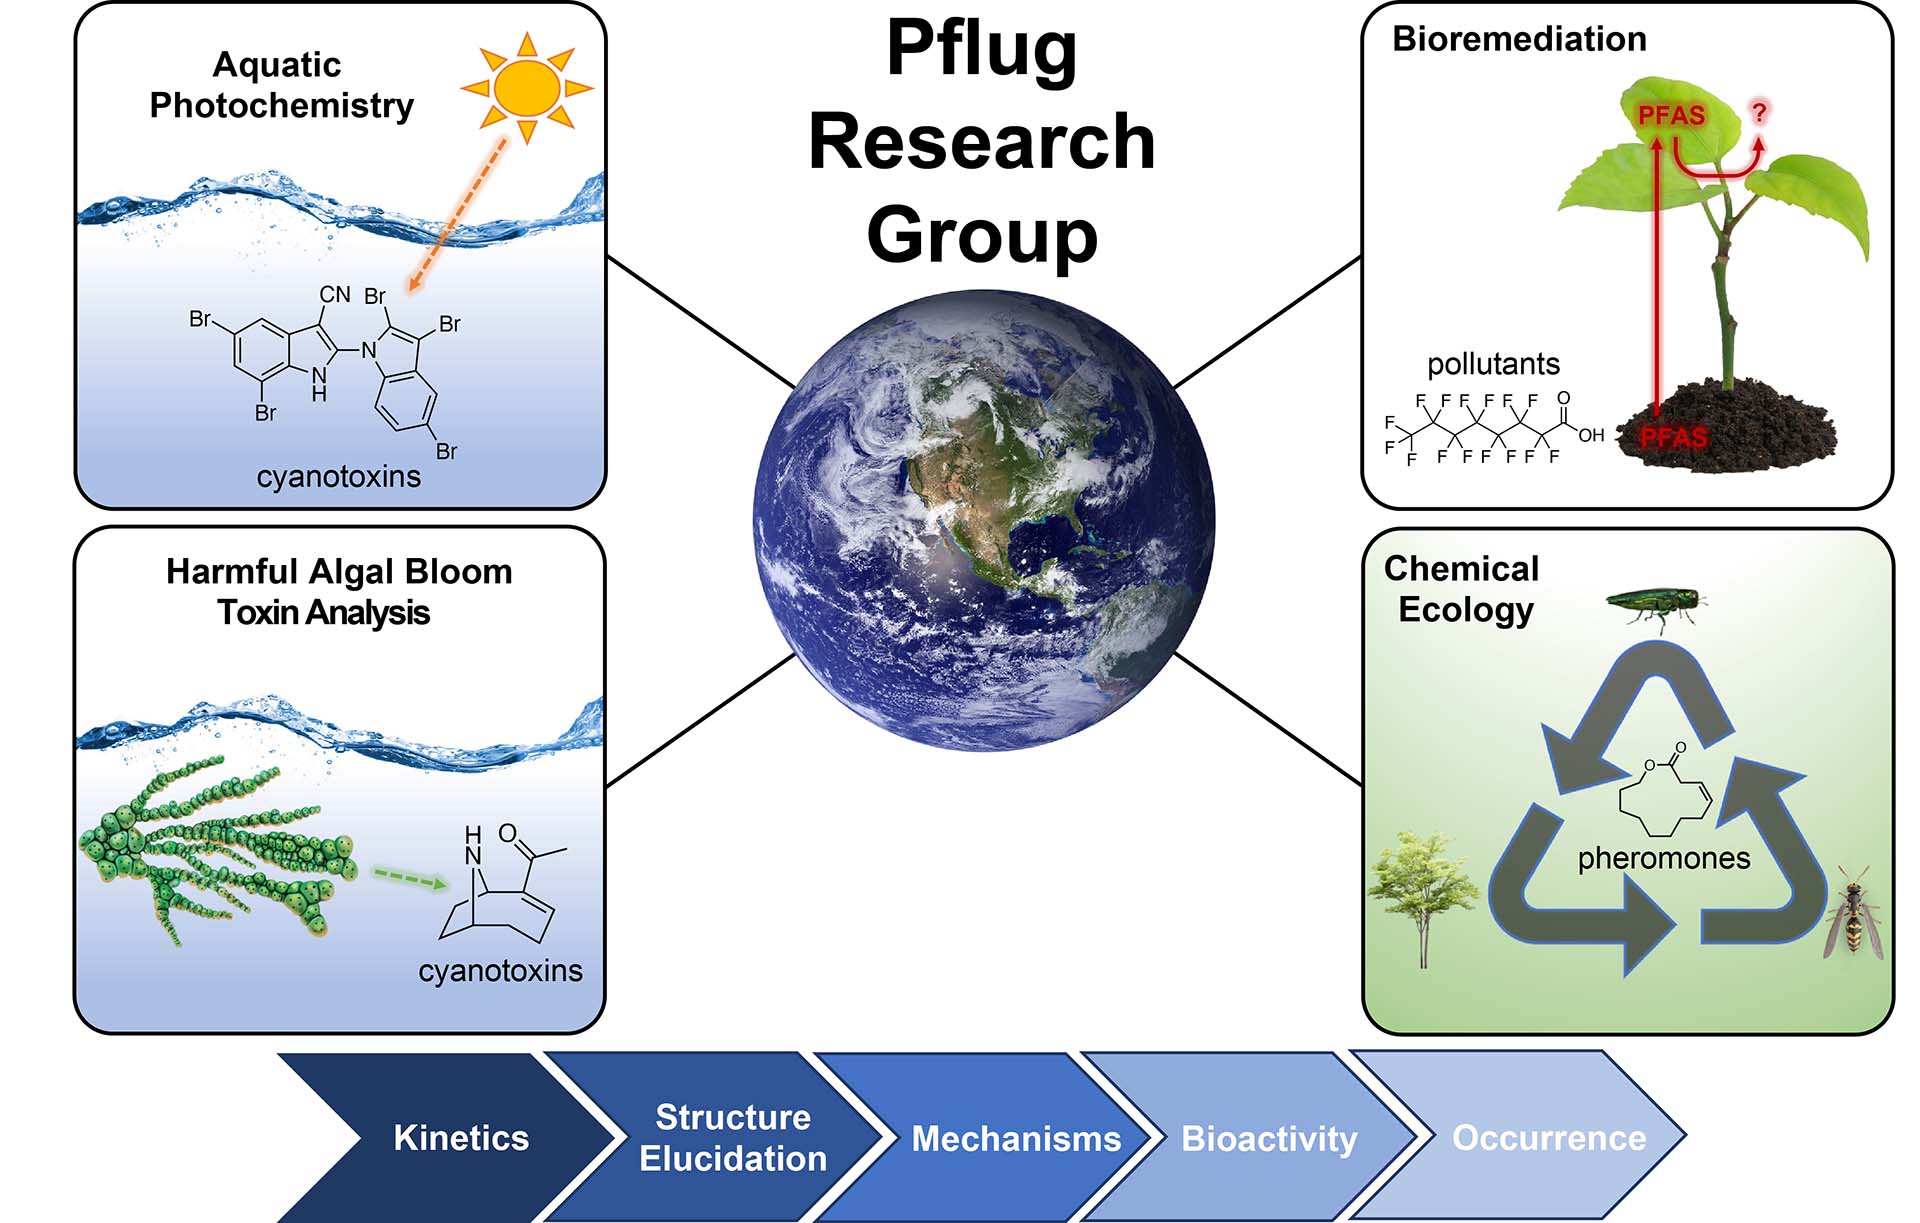 Diagram showing the relationship of different areas of research in the Pflug Lab.